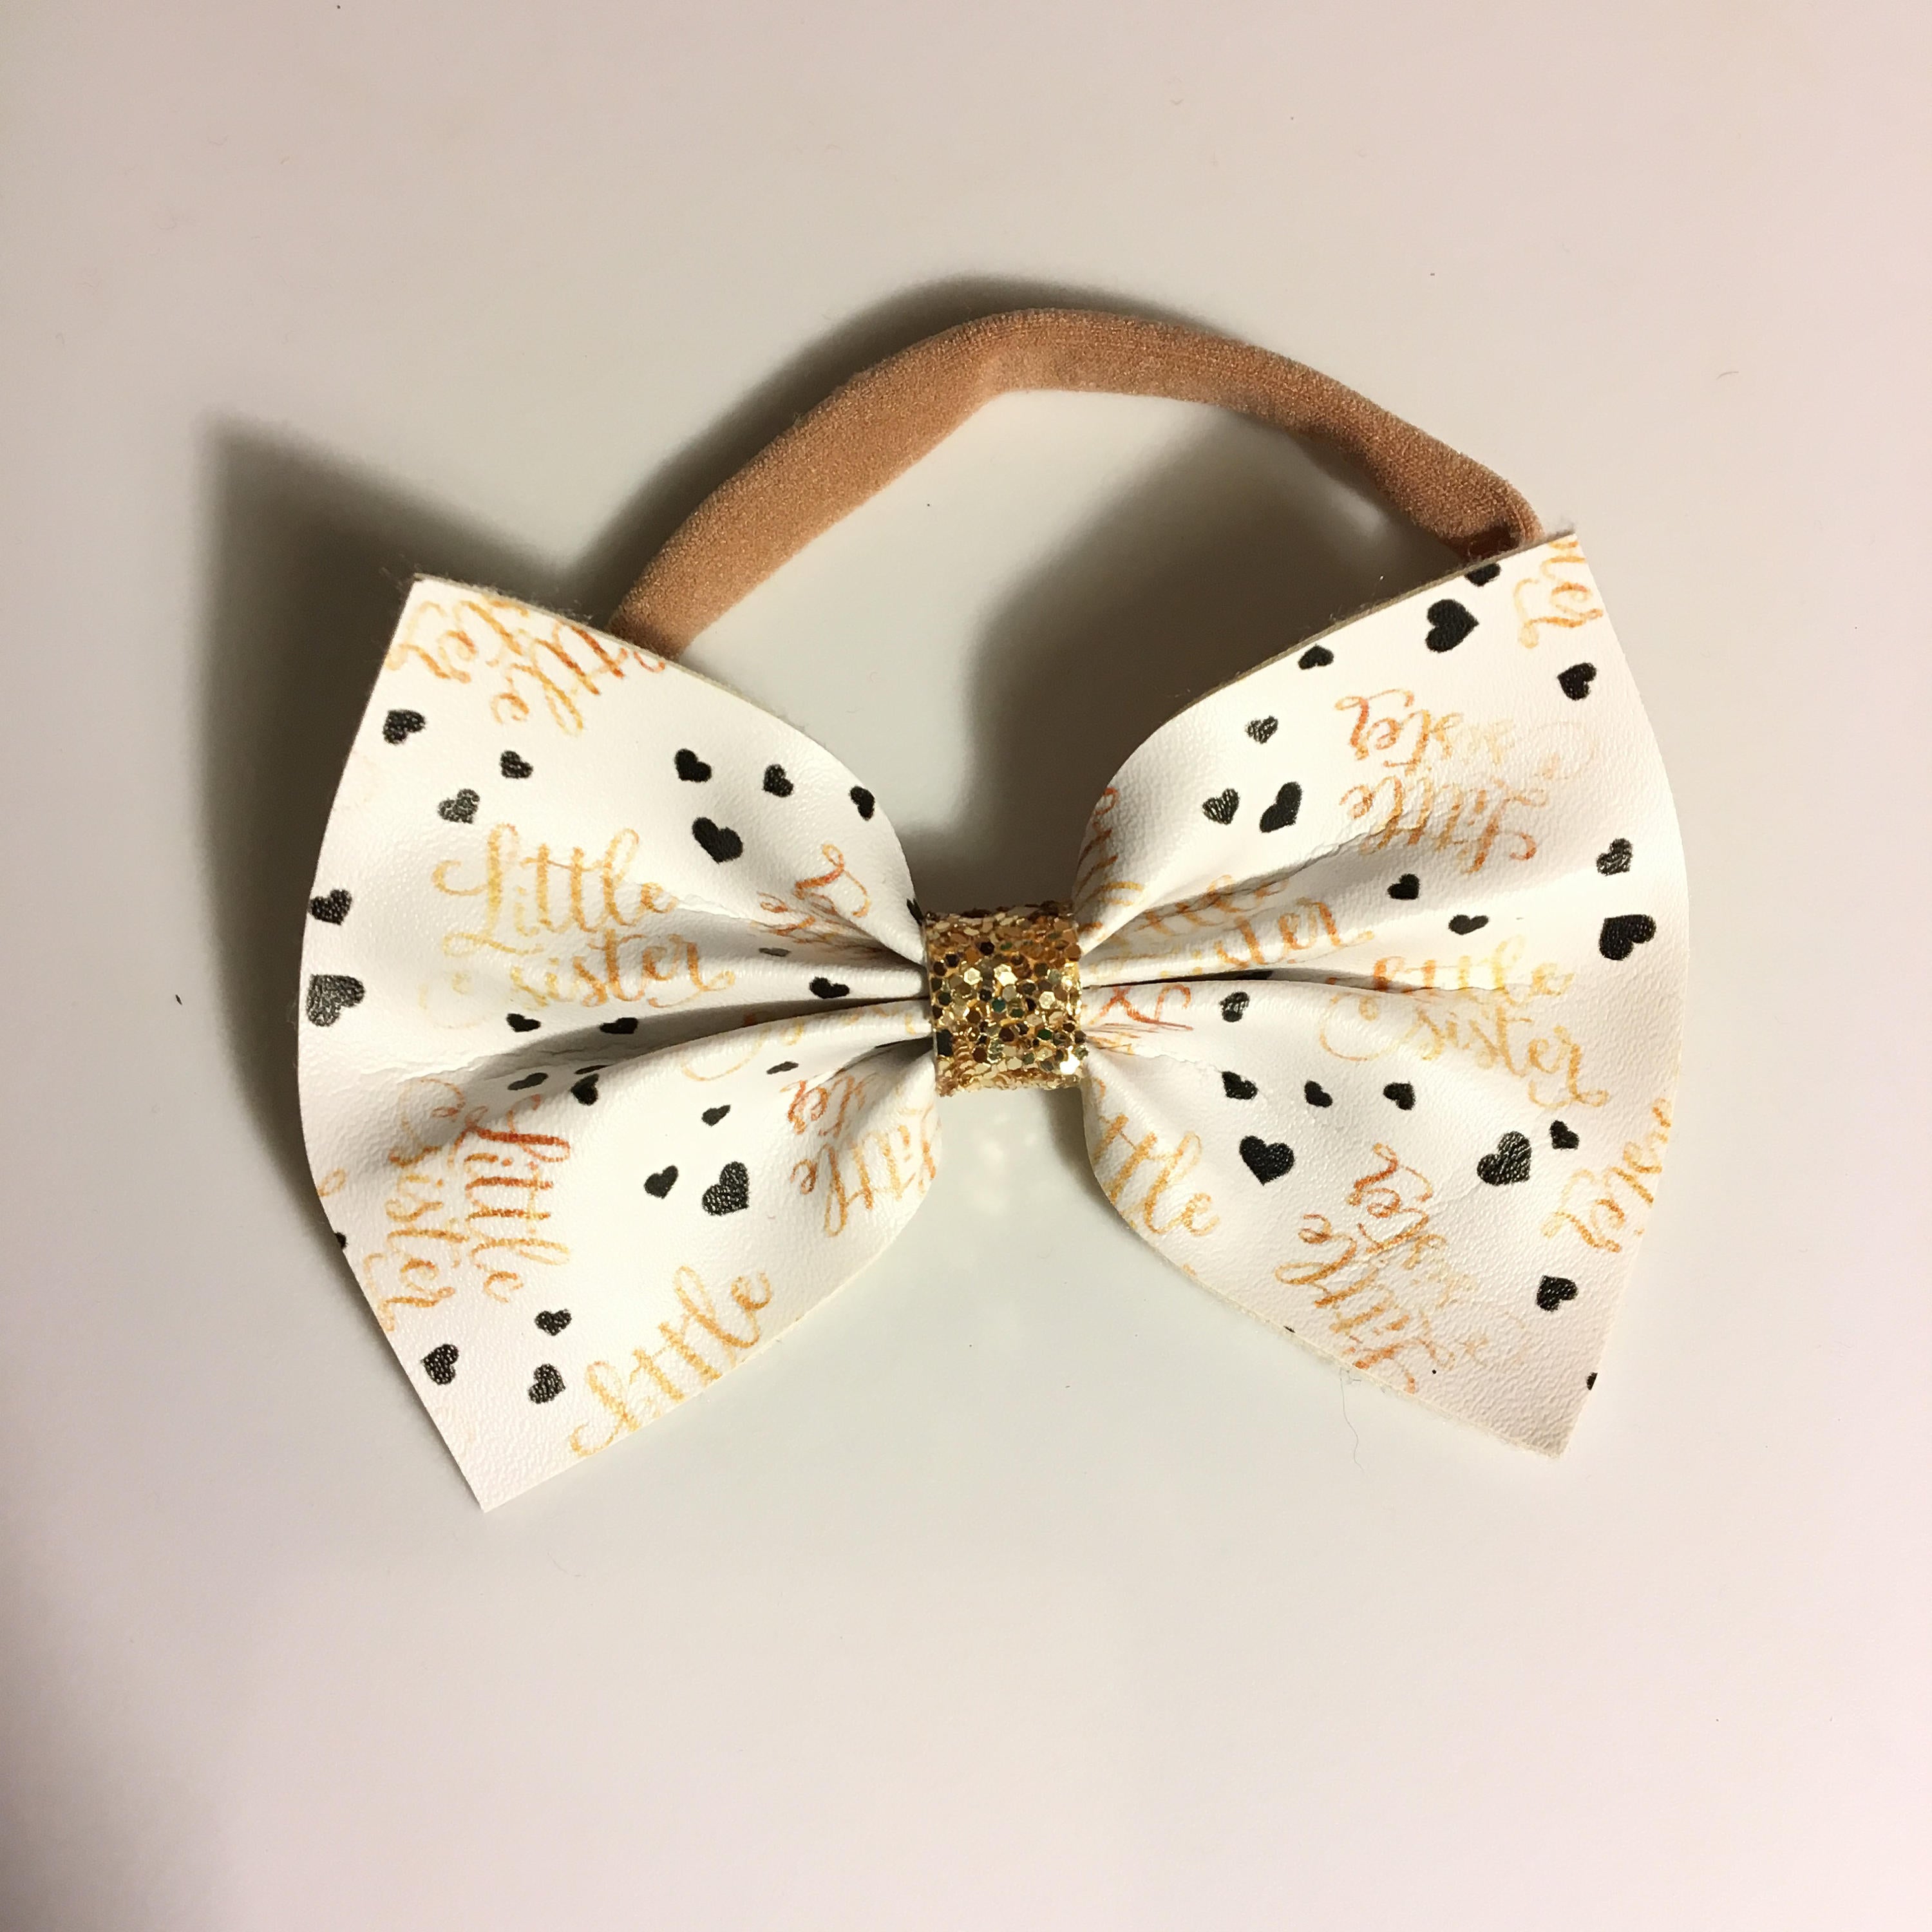 Little sister or Big sister bow 3 inch